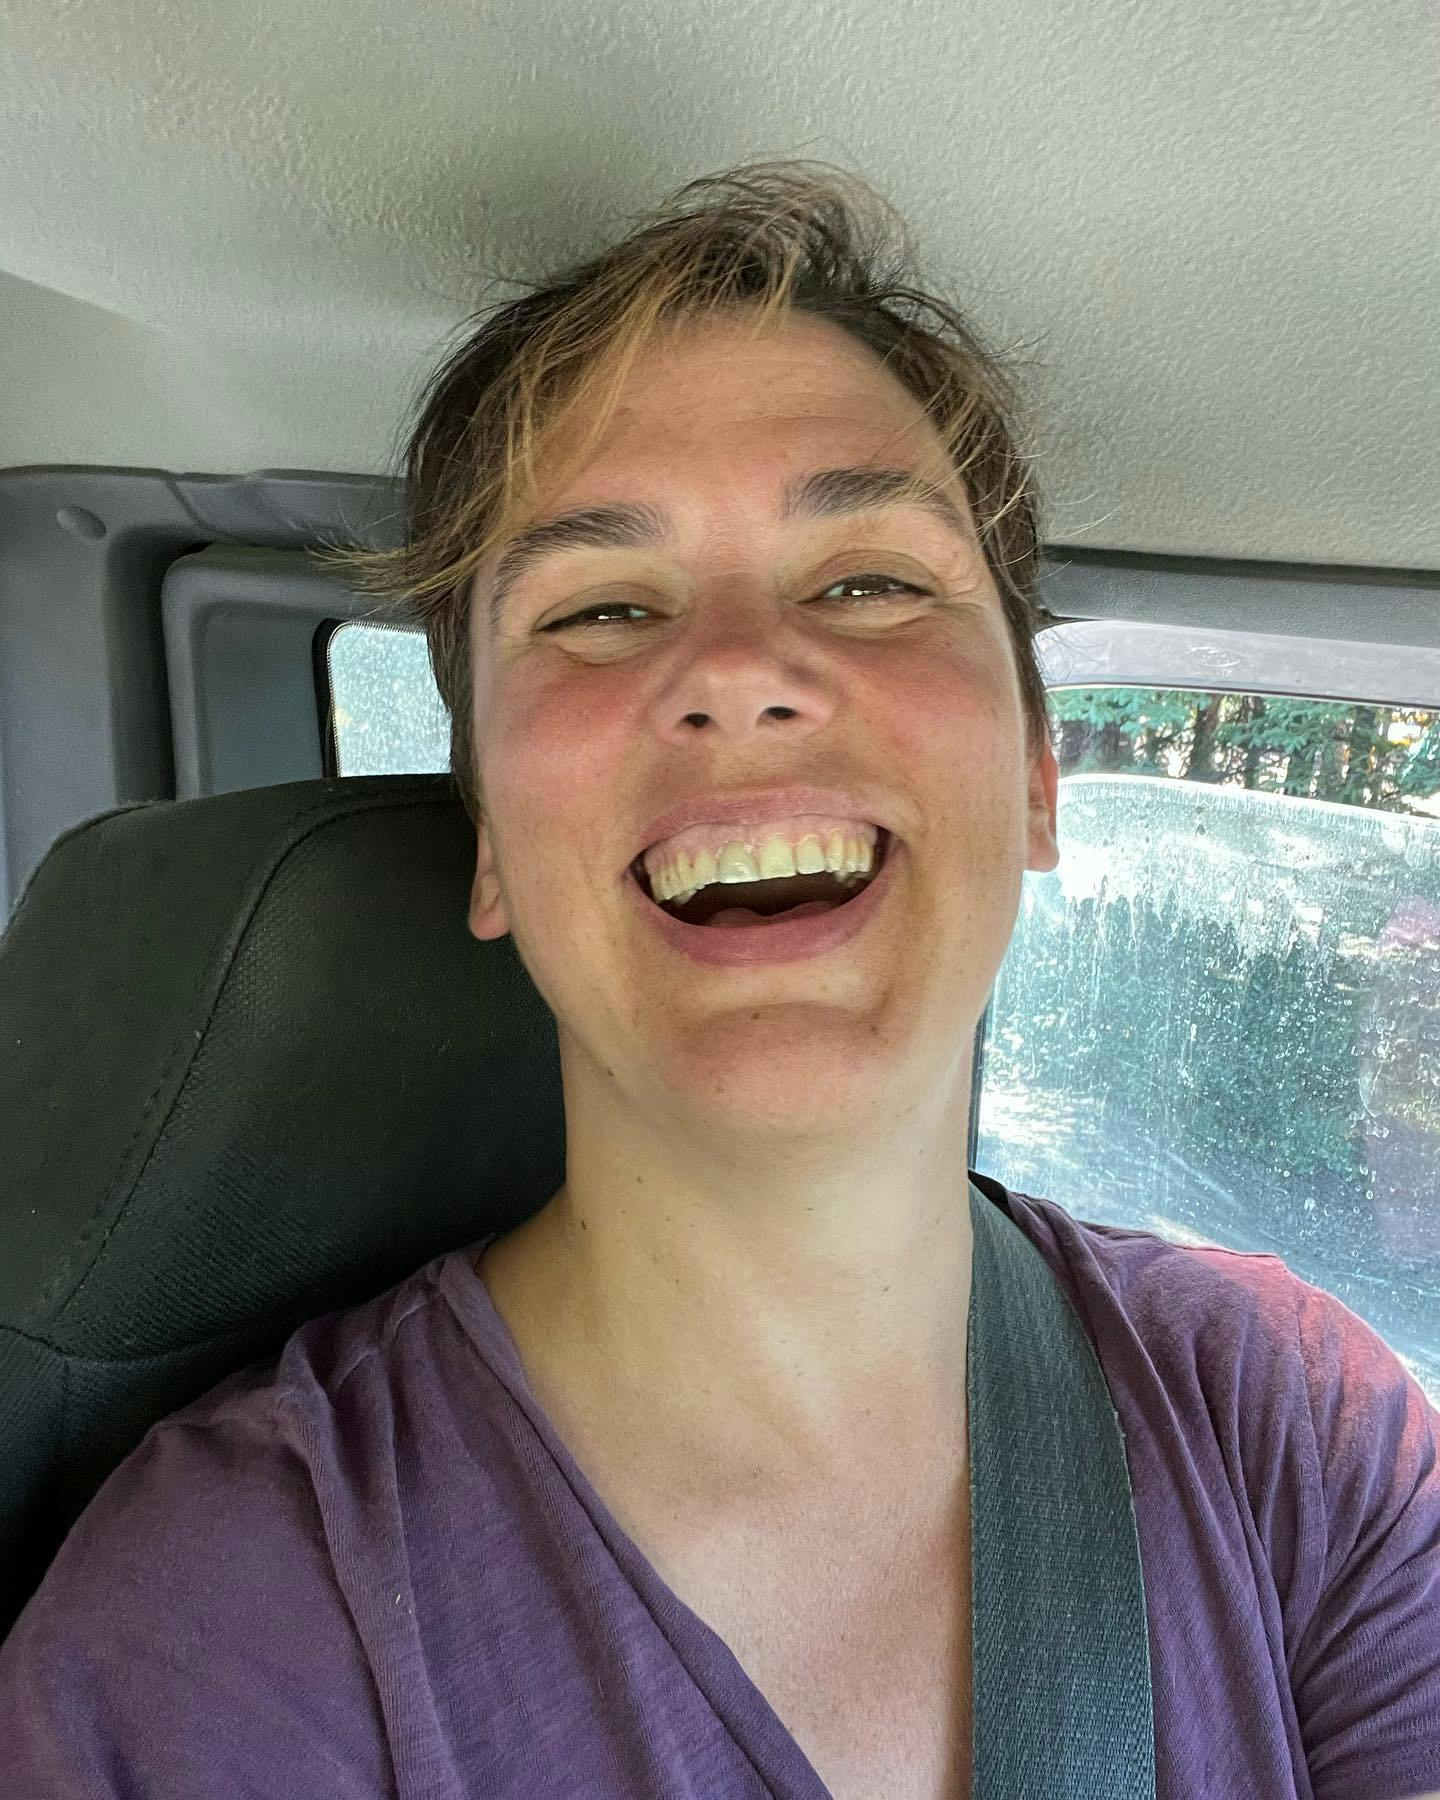 Janelle Hardy, a white woman with short brown hair and a summertime tan, is sitting in a truck with muddy windows, wearing a purple t-shirt, with her head tossed back and a huge, eye-crinkling smile on her face.